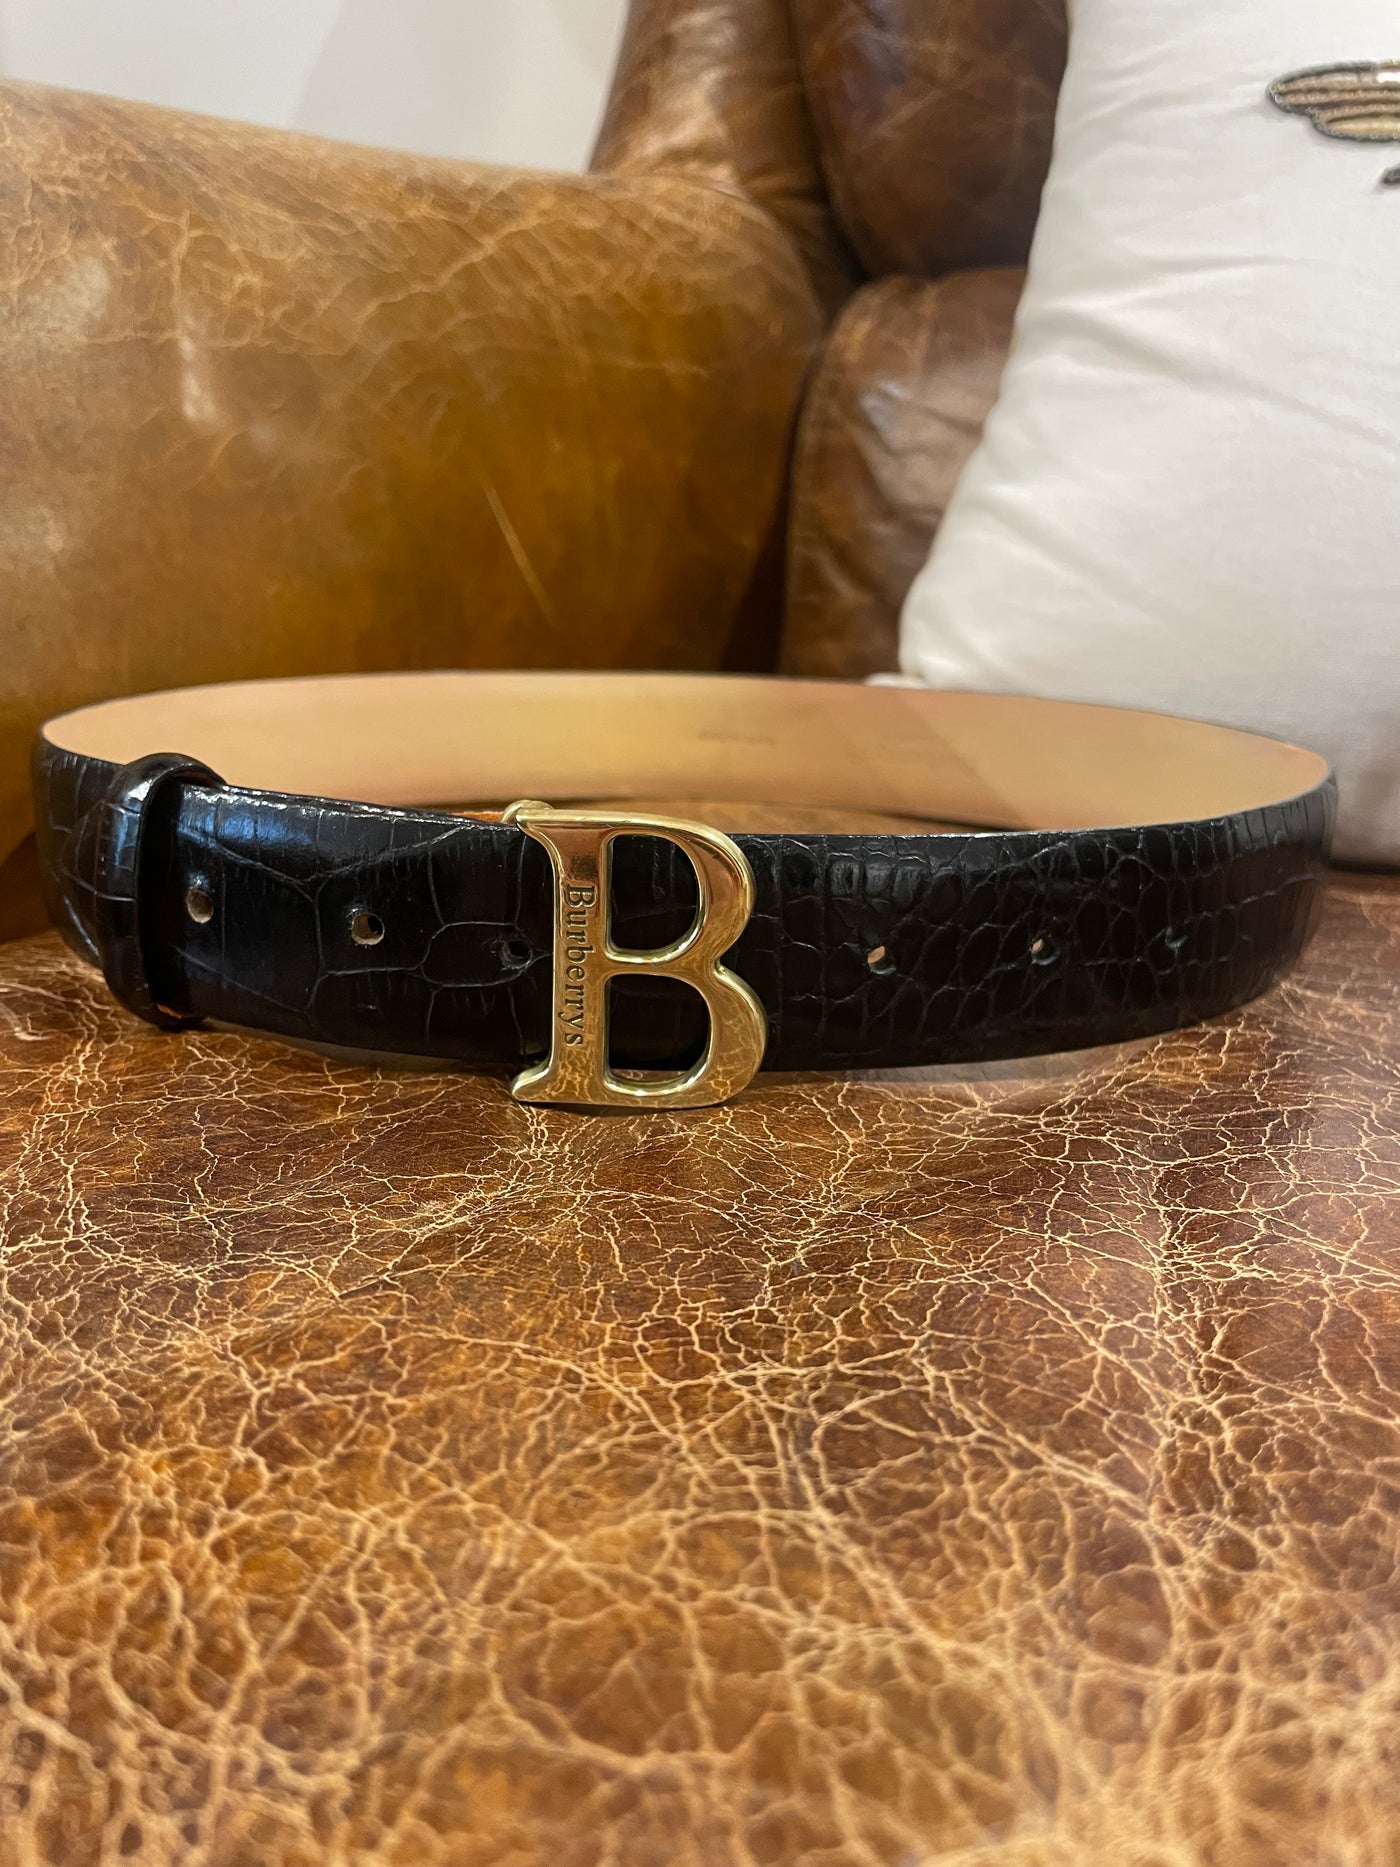 Burberry black leather belt with B logo buckle size S